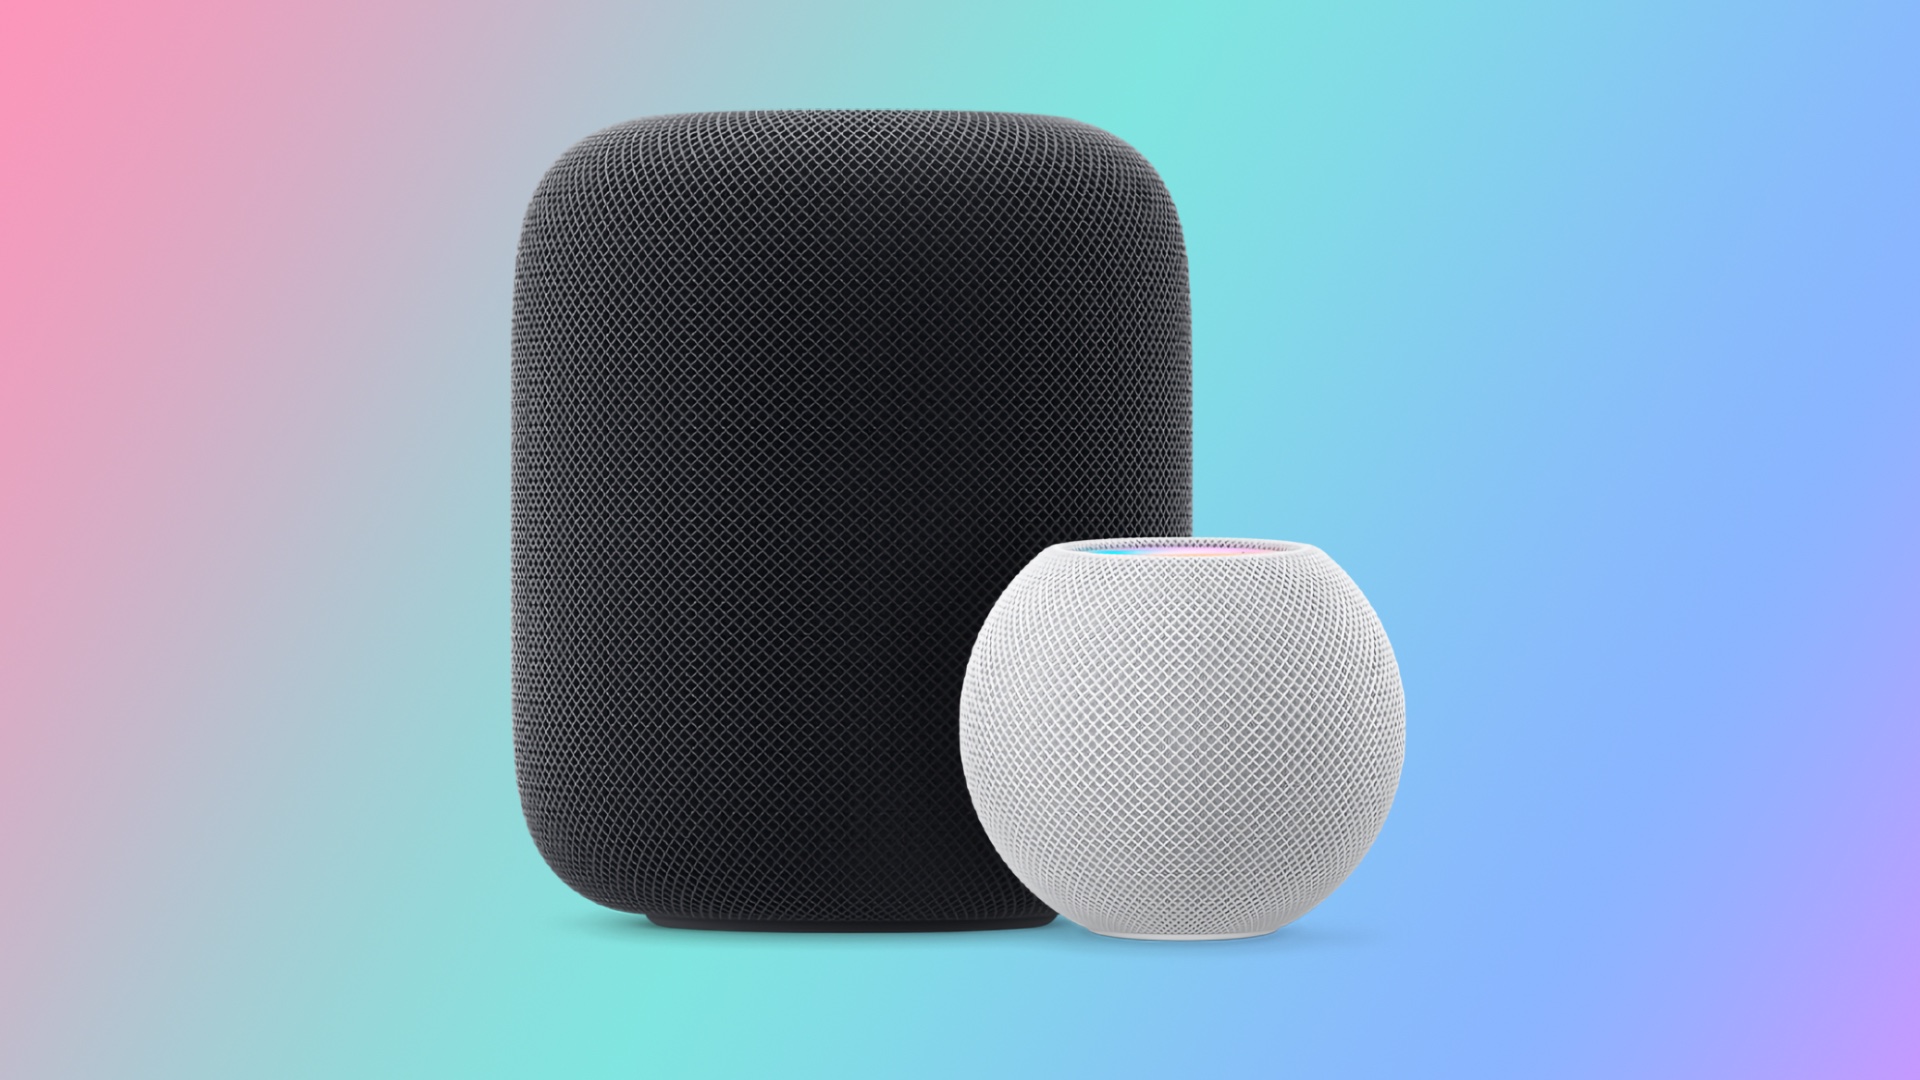 iOS 16.4 beta hints at HomePod launch in Israel with support for Siri in Hebrew